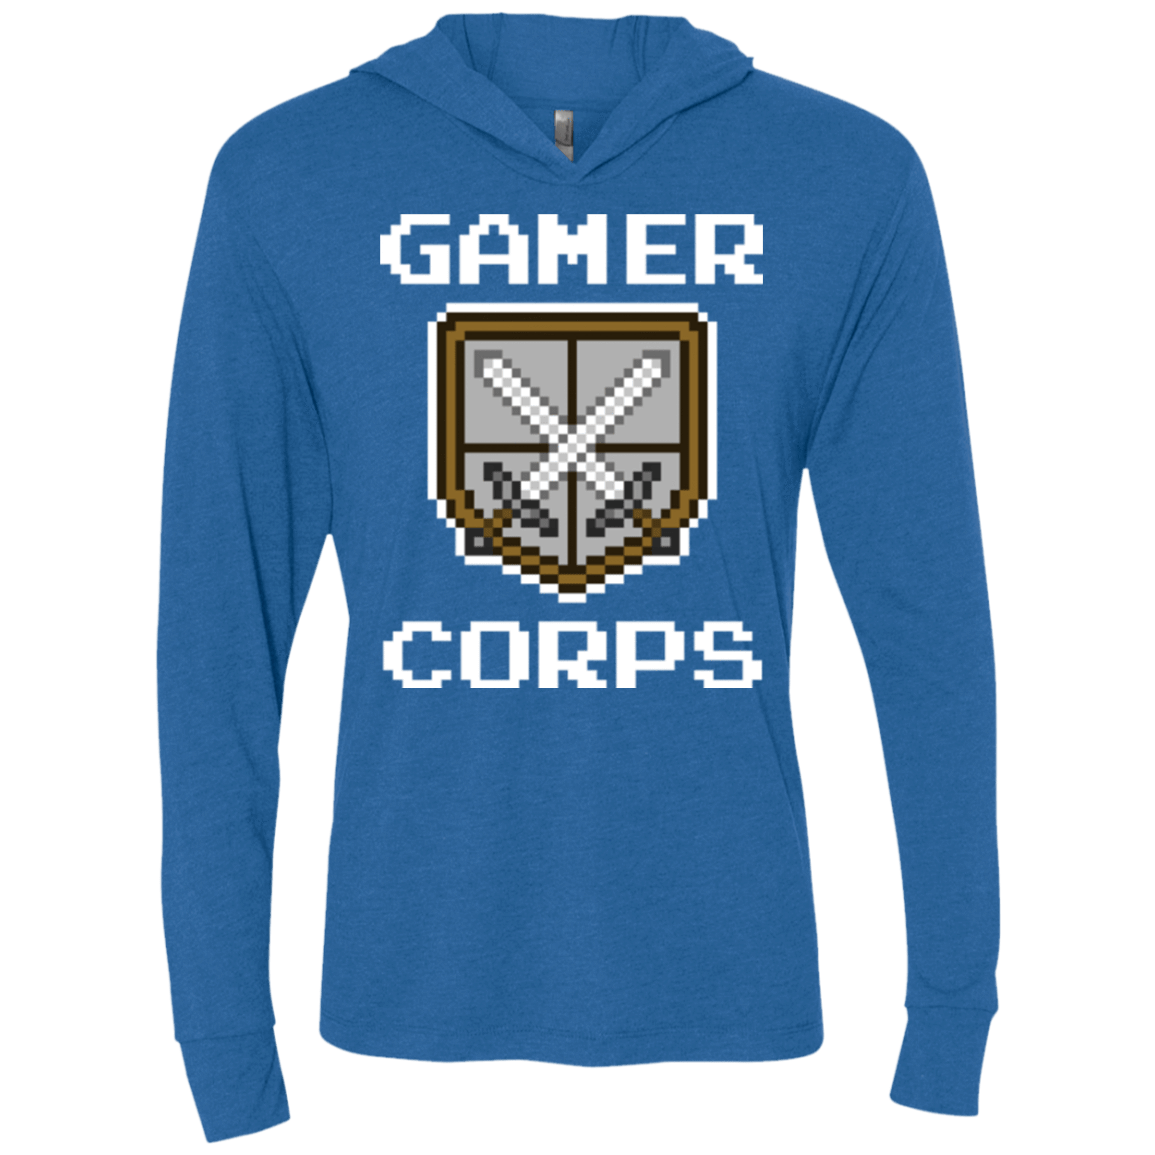 T-Shirts Vintage Royal / X-Small Gamer corps Triblend Long Sleeve Hoodie Tee